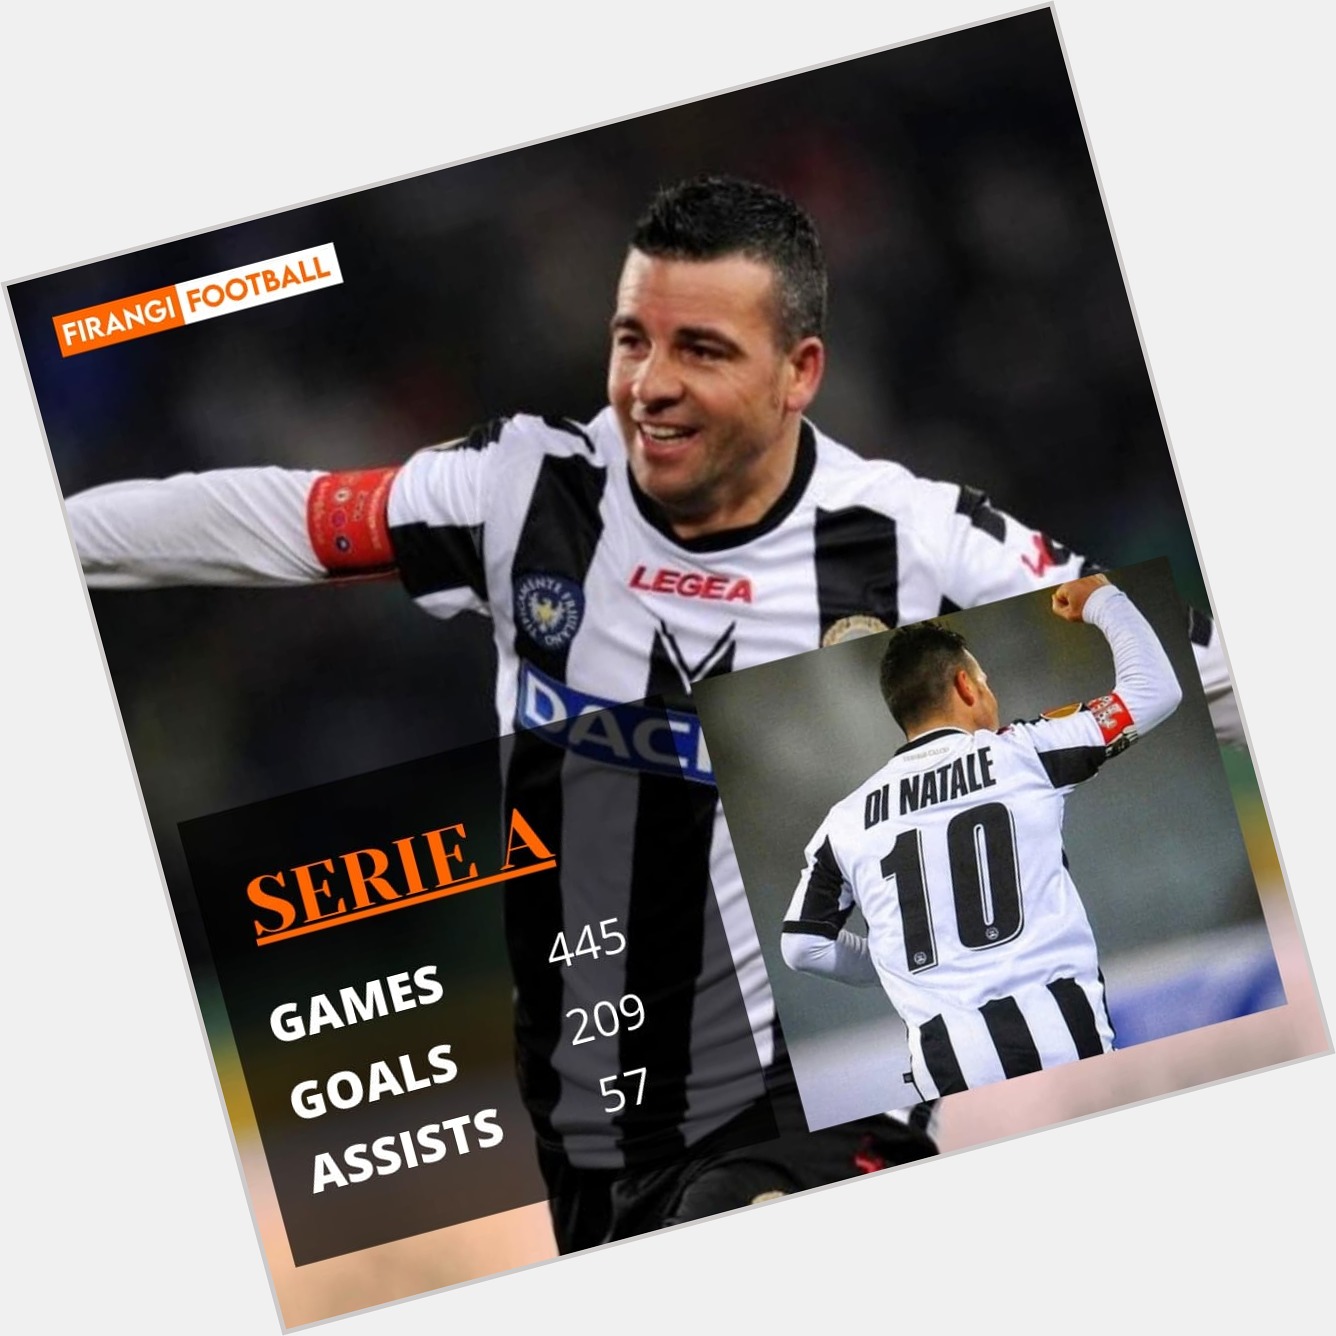 Happy 44th Birthday to the Serie A Legend.

He was unplayable in Udinese  Antonio Di Natale!  